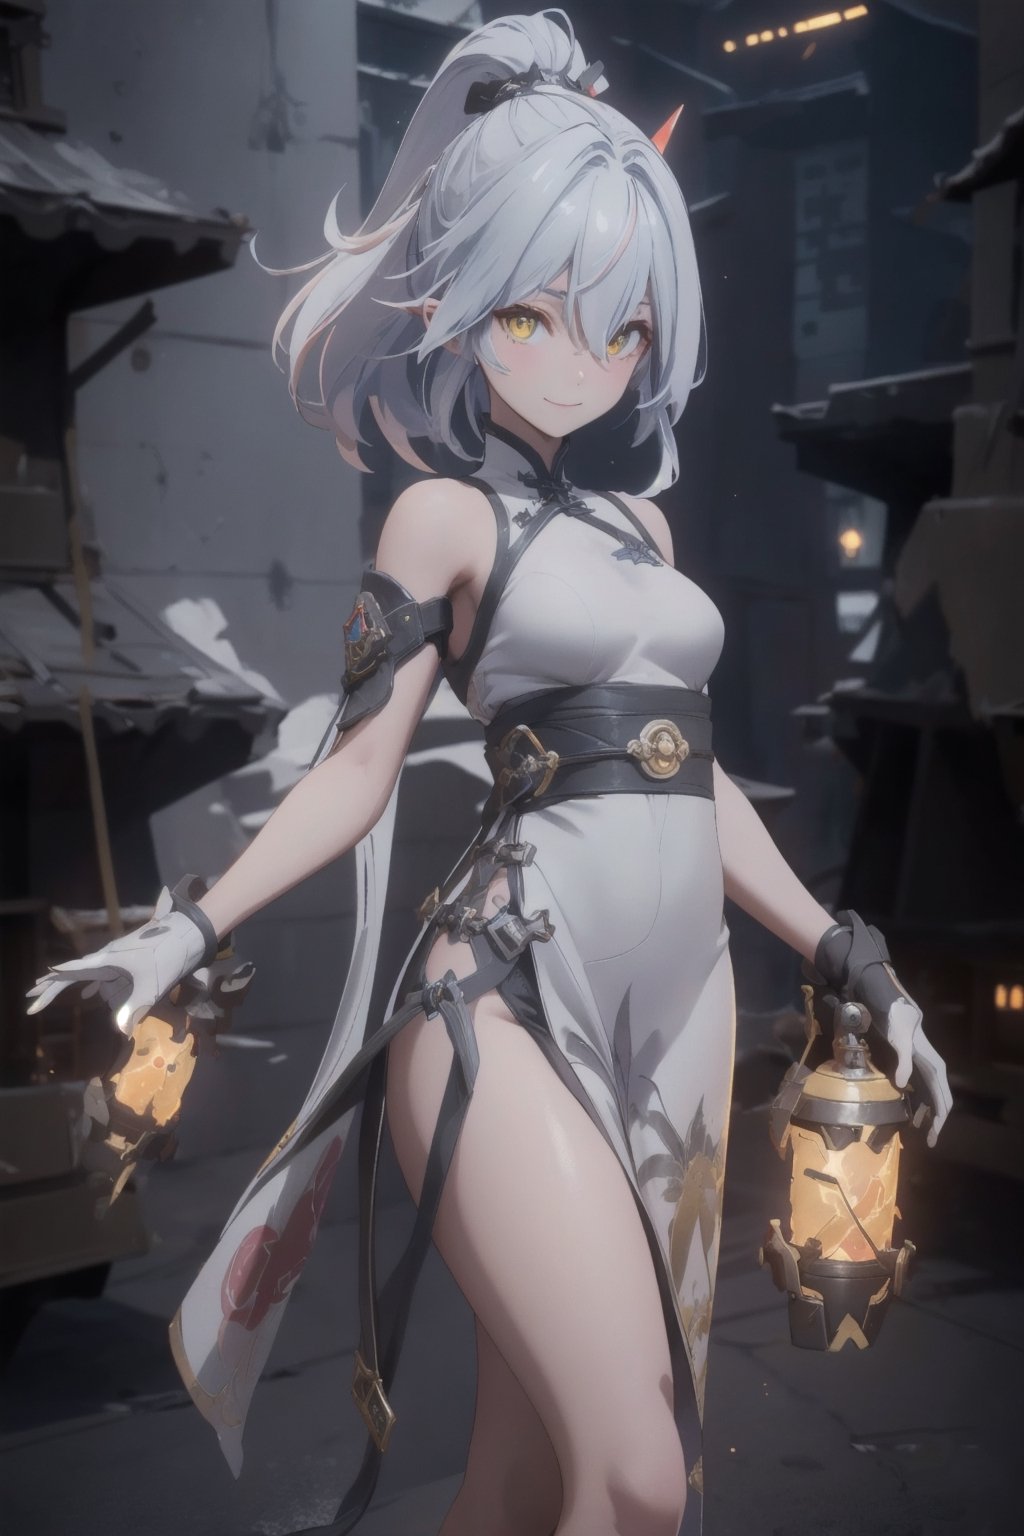 an alone mature girl with long red color slice gray hair , yellow eye, standing, china city , night time, High detail mature face, bare leg, bare shoulder, white china dress, white glove, black boot, high res, ultra sharp, 8k, masterpiece, smiling, weapon, fantasy world, magical radiance background ((Best quality)), ((masterpiece)), 3D, HDR (High Dynamic Range),Ray Tracing, NVIDIA RTX, Super-Resolution, Unreal 5,Subsurface scattering, PBR Texturing, Post-processing, Anisotropic Filtering, Depth-of-field, Maximum clarity and sharpness, Multi-layered textures, Albedo and Specular maps, Surface shading, Accurate simulation of light-material interaction, Perfect proportions, Octane Render, Two-tone lighting, Wide aperture, Low ISO, White balance, Rule of thirds,8K RAW, Aura, masterpiece, best quality, Mysterious expression, magical effects like sparkles or energy, flowing robes or enchanting attire, mechanic creatures or mystical background, rim lighting, side lighting, cinematic light, ultra high res, 8k uhd, film grain, best shadow, delicate, RAW, light particles, detailed skin texture, detailed cloth texture, beautiful face, (masterpiece), best quality, expressive eyes, perfect face,mecha musume